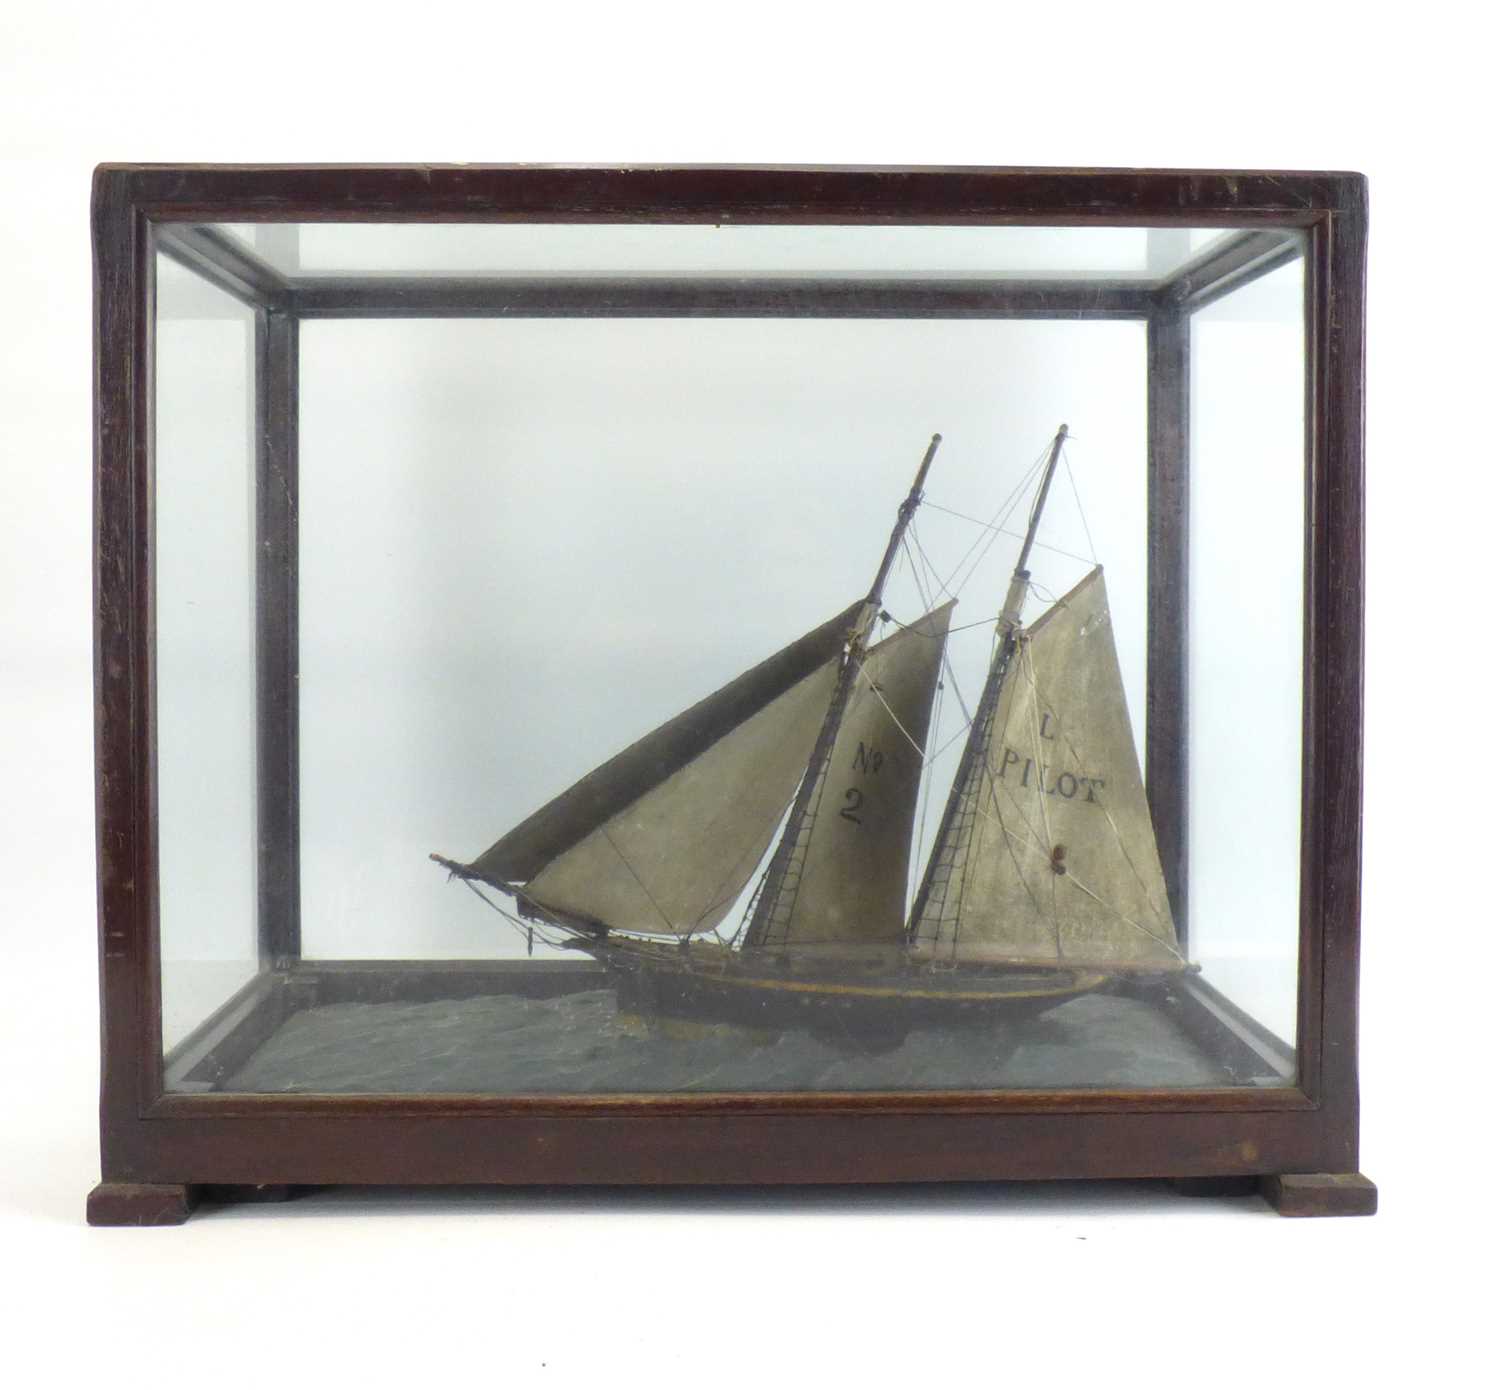 A late 19th/early 20th century wooden model of a two-masted sailboat with 'No.2' to one sail, the